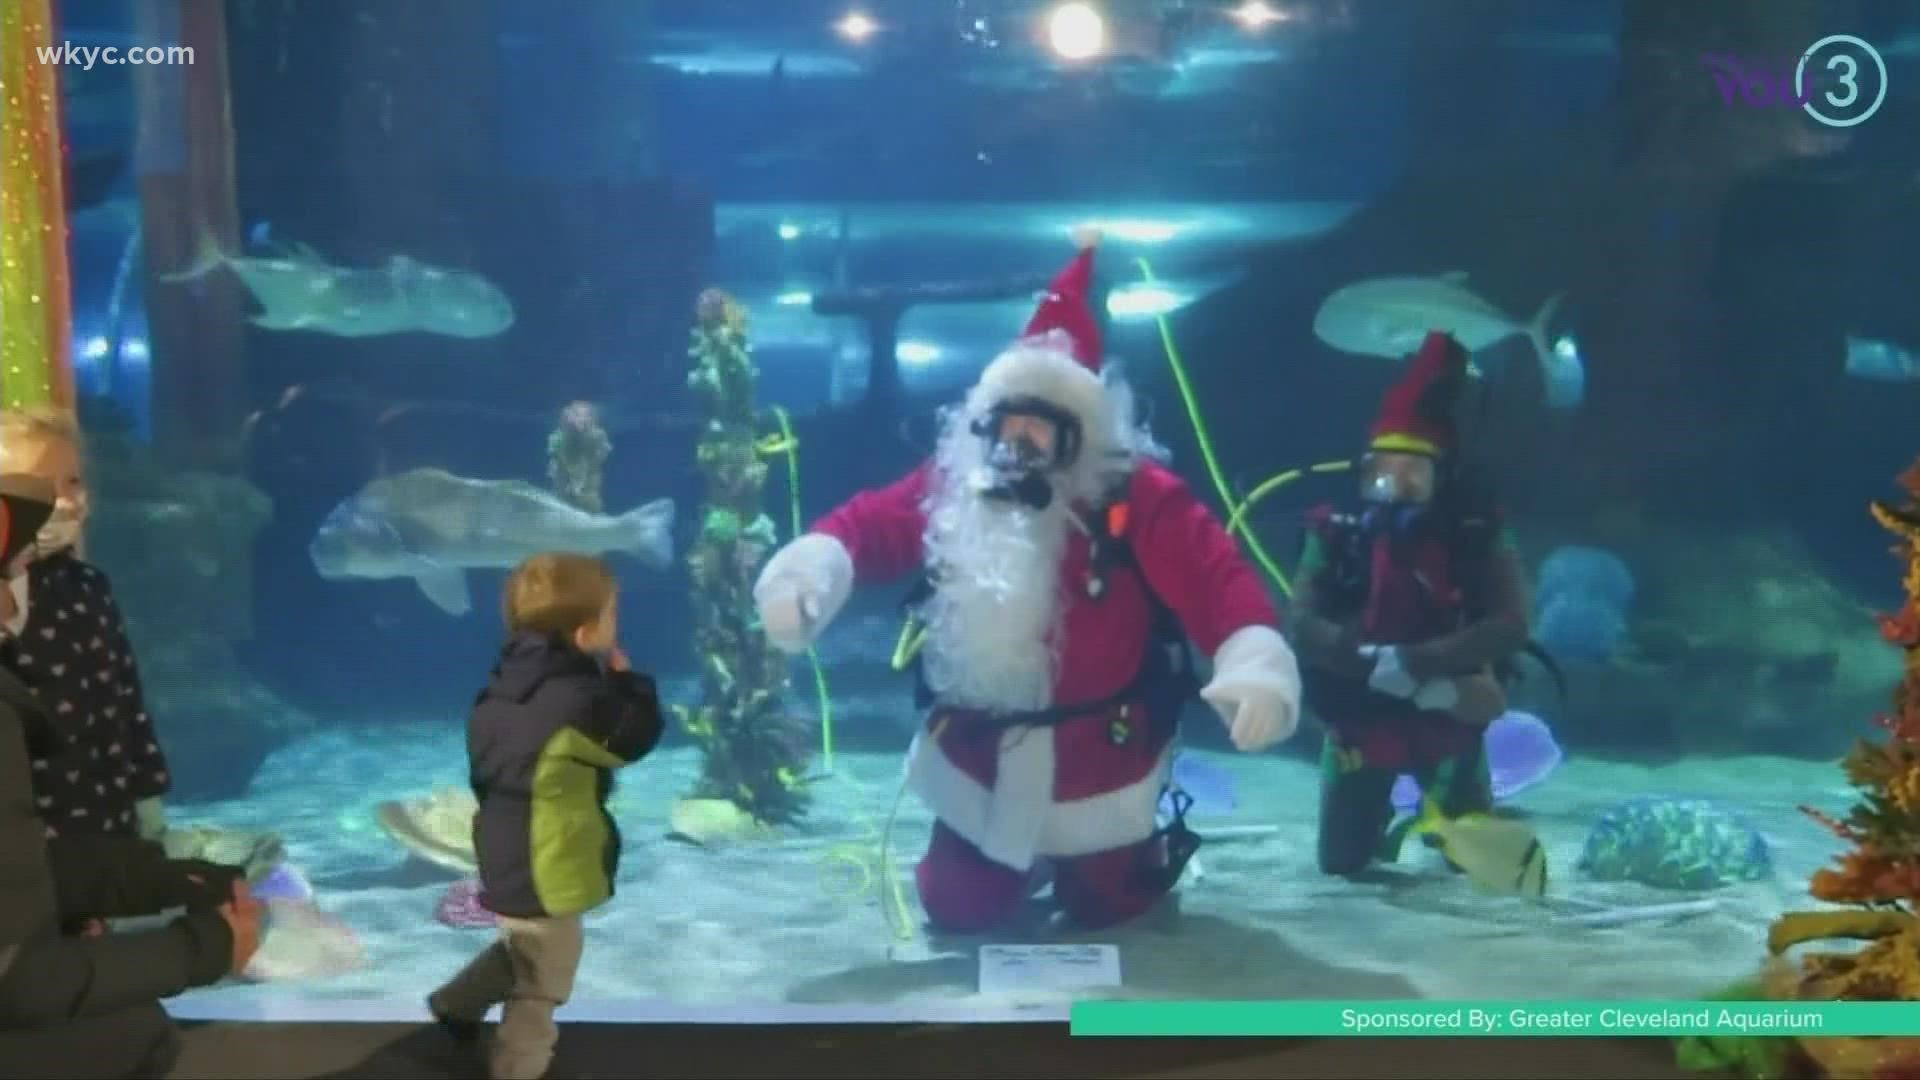 Scuba Santa is back! Joe talks with Stephanie White about the family fun you can experience during the holidays at the Greater Cleveland Aquarium!